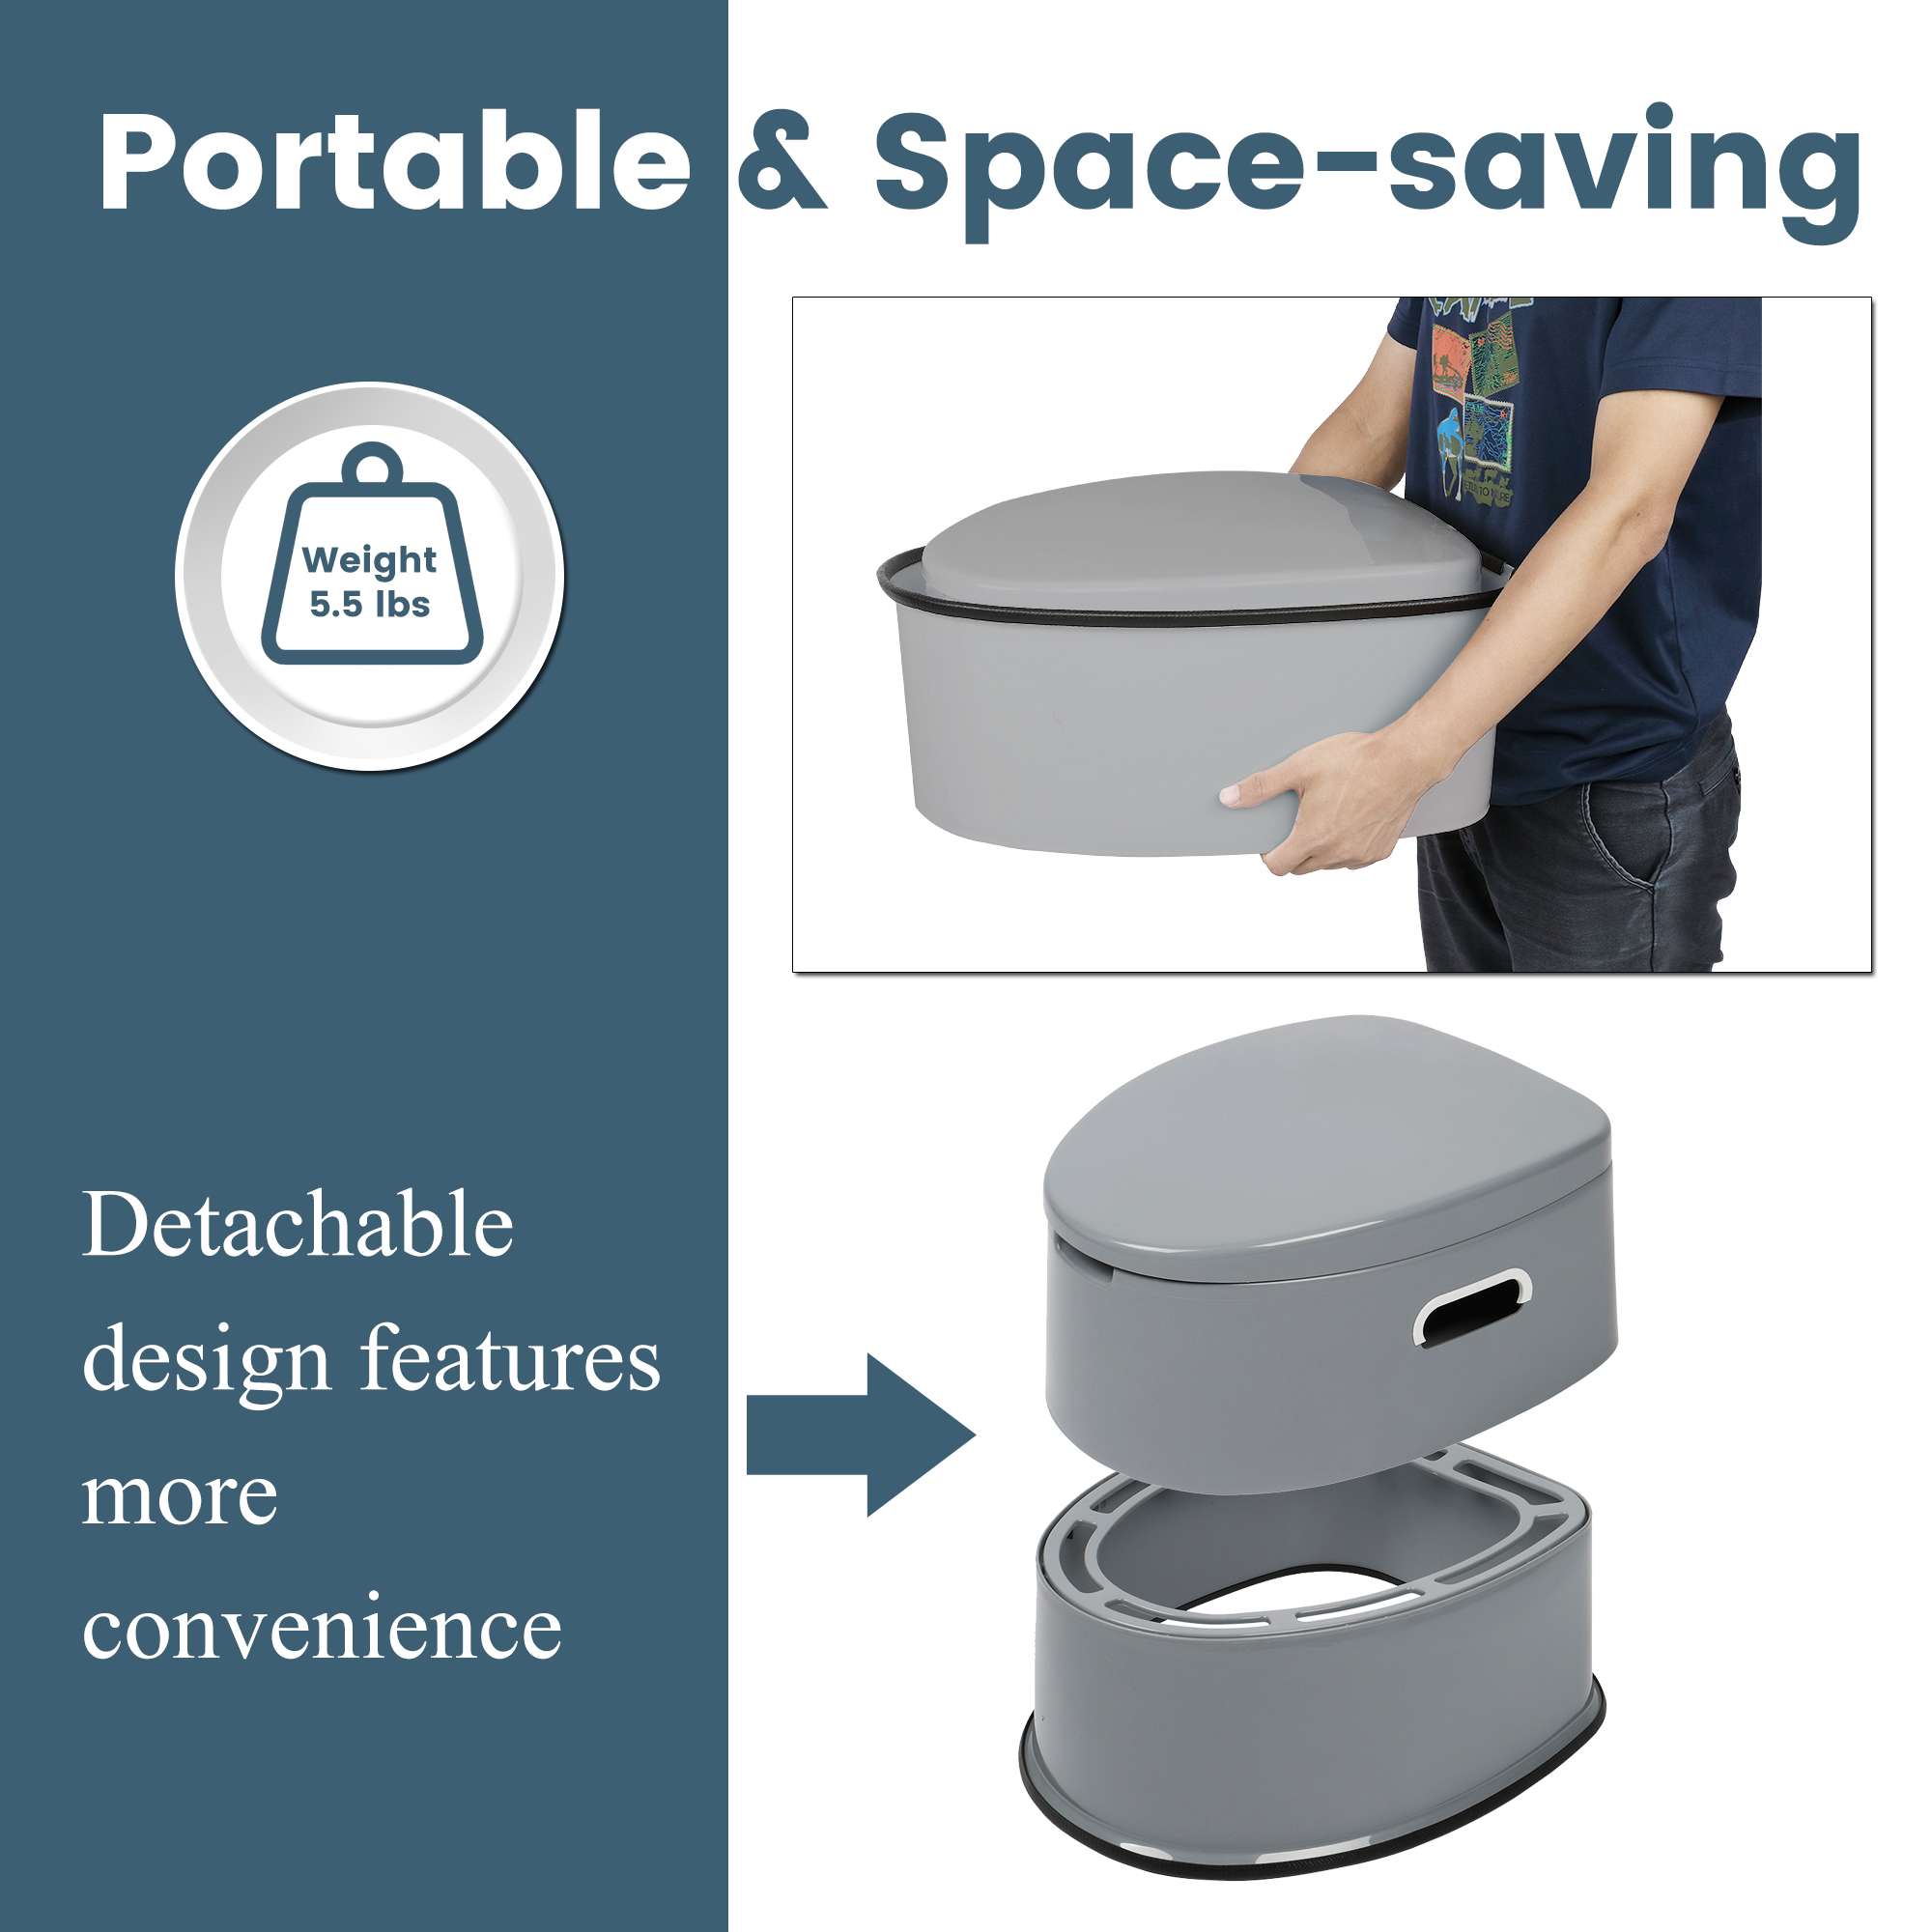 Portable Camping Toilet, ASJ Portable Toilet Seat with Detachable Inner Bucket, Indoor & Outdoor Travel Toilet for RV/Camping/Boating, Portable Toilet with Non-slip Mat, Gray - image 5 of 7